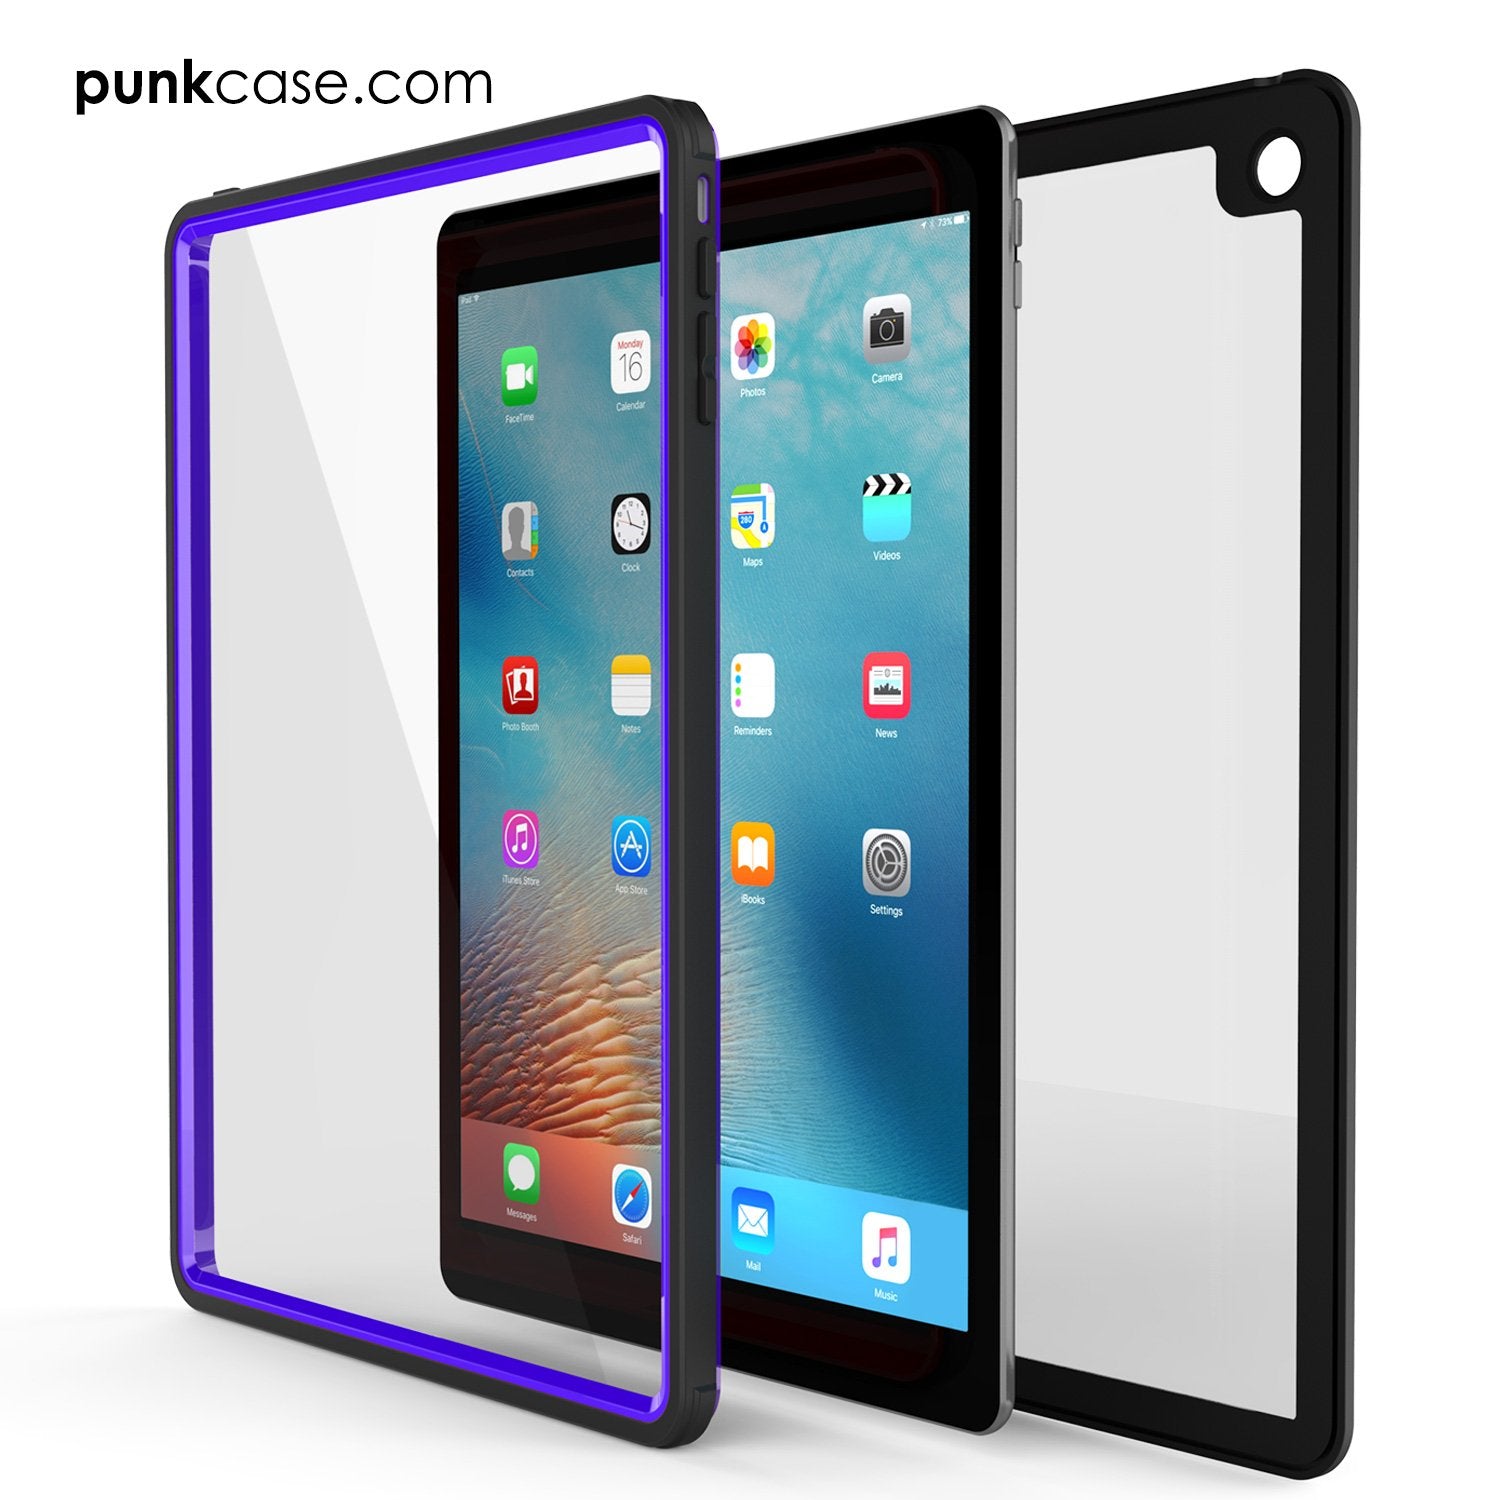 Punkcase iPad Pro 9.7 Case [CRYSTAL Series], Waterproof, Ultra-Thin Cover [Shockproof] [Dustproof] with Built-in Screen Protector [Purple]